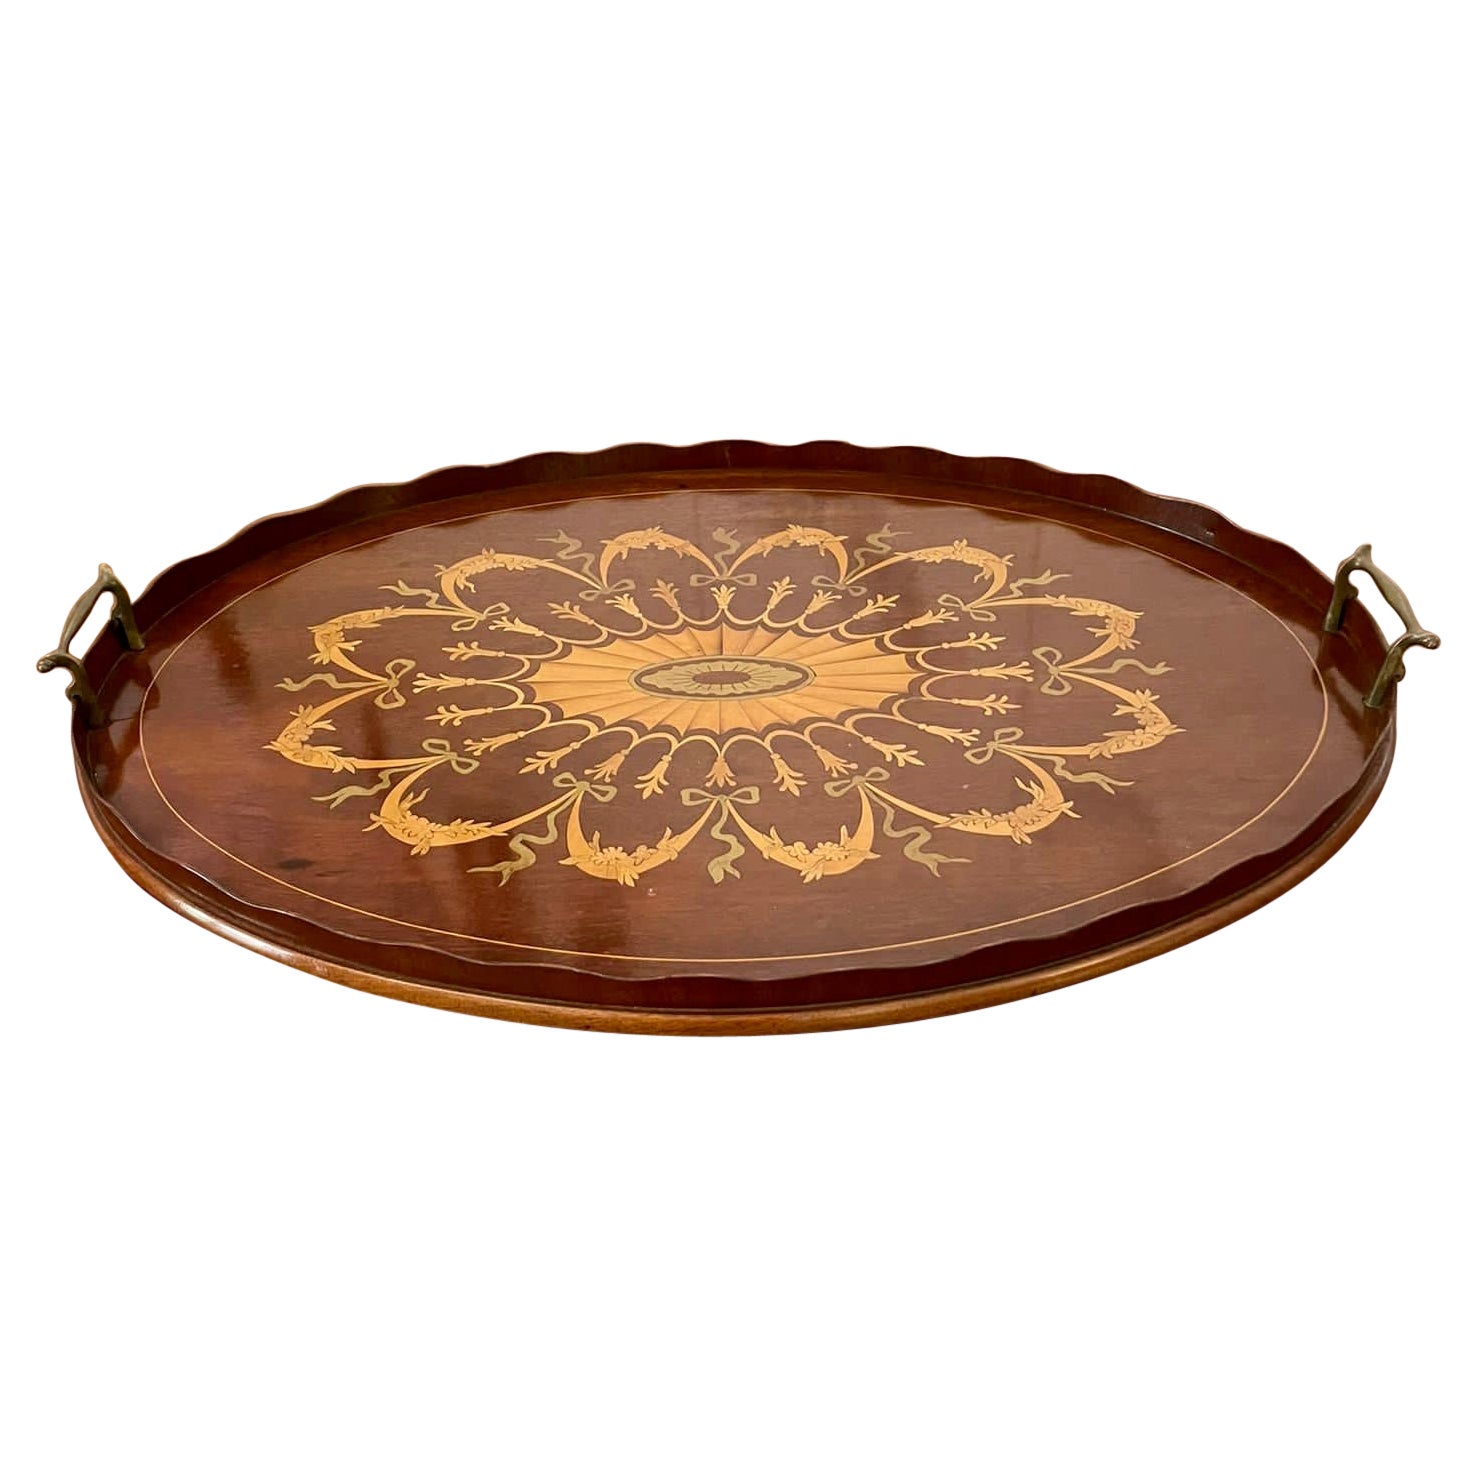 Outstanding Quality Edwardian Inlaid Mahogany Oval Tray For Sale